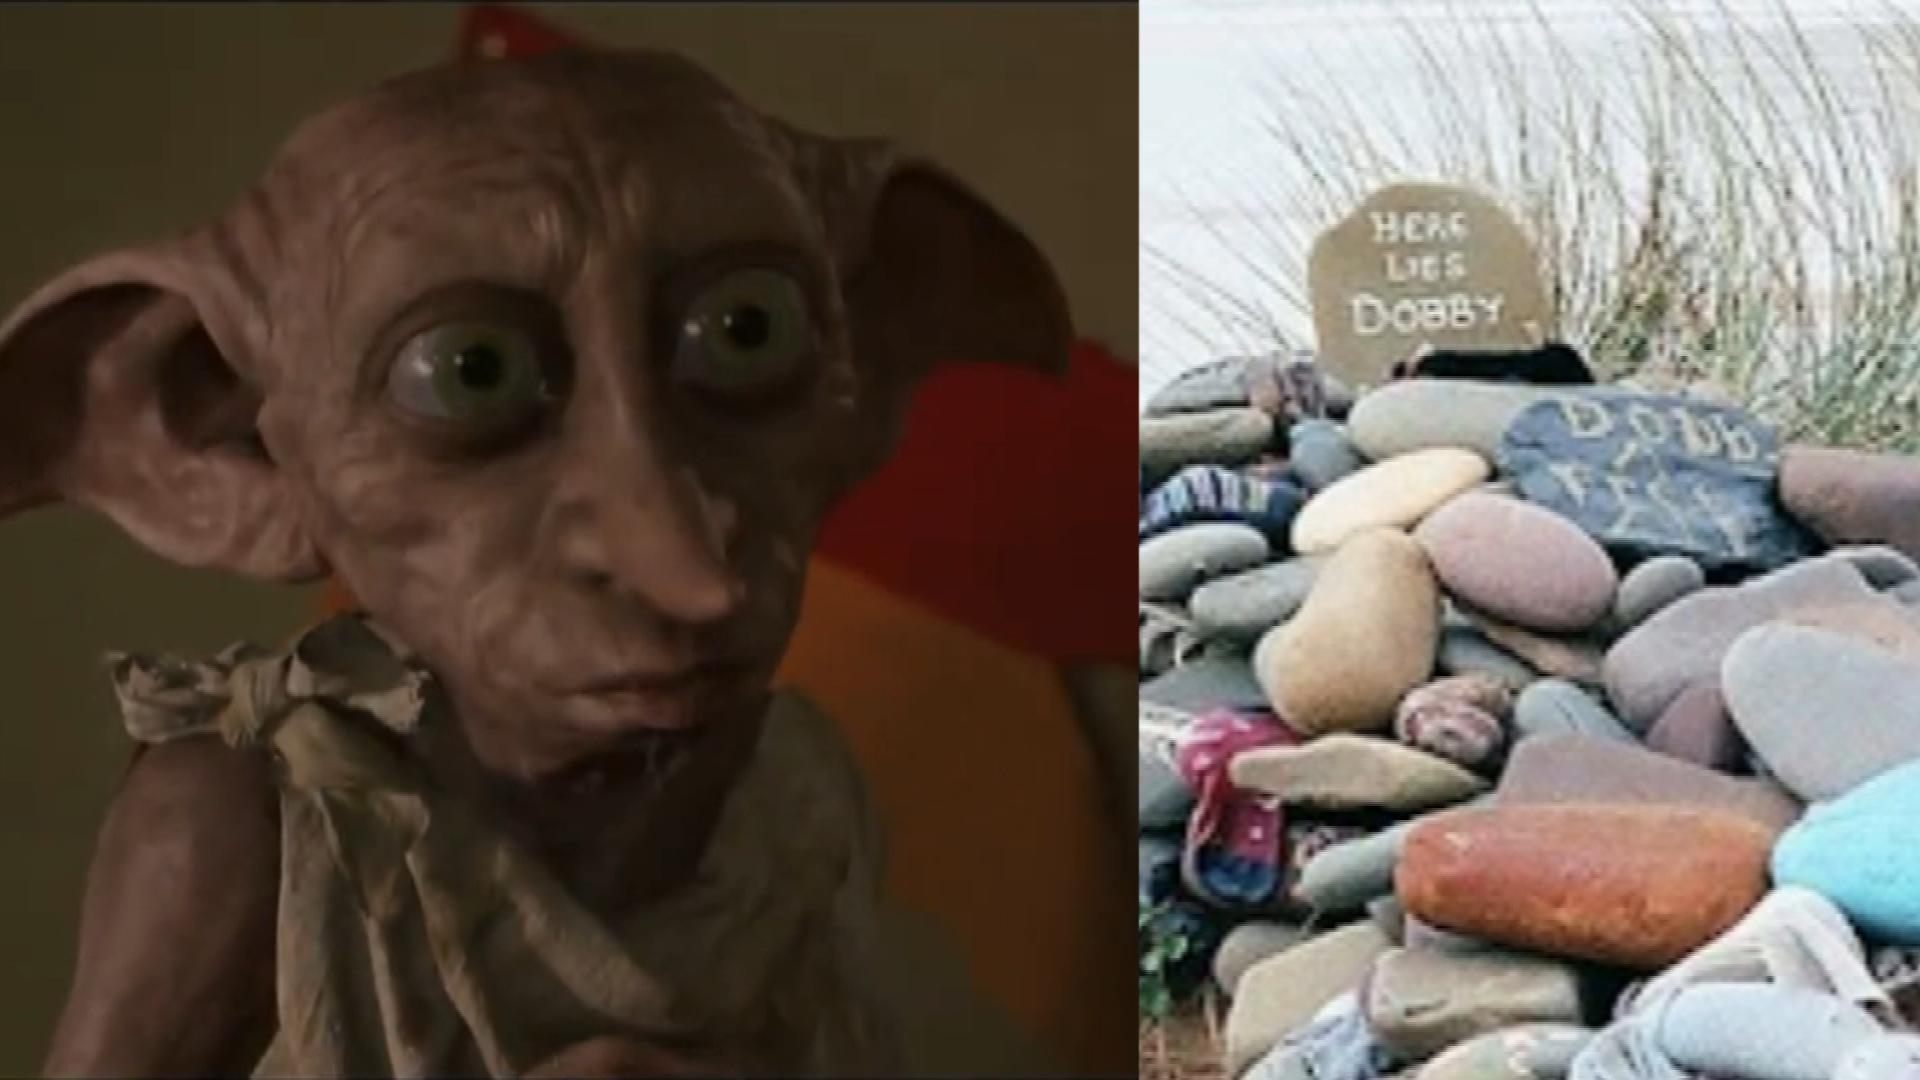 Harry Potter fans leave socks at Dobby memorial in Wales